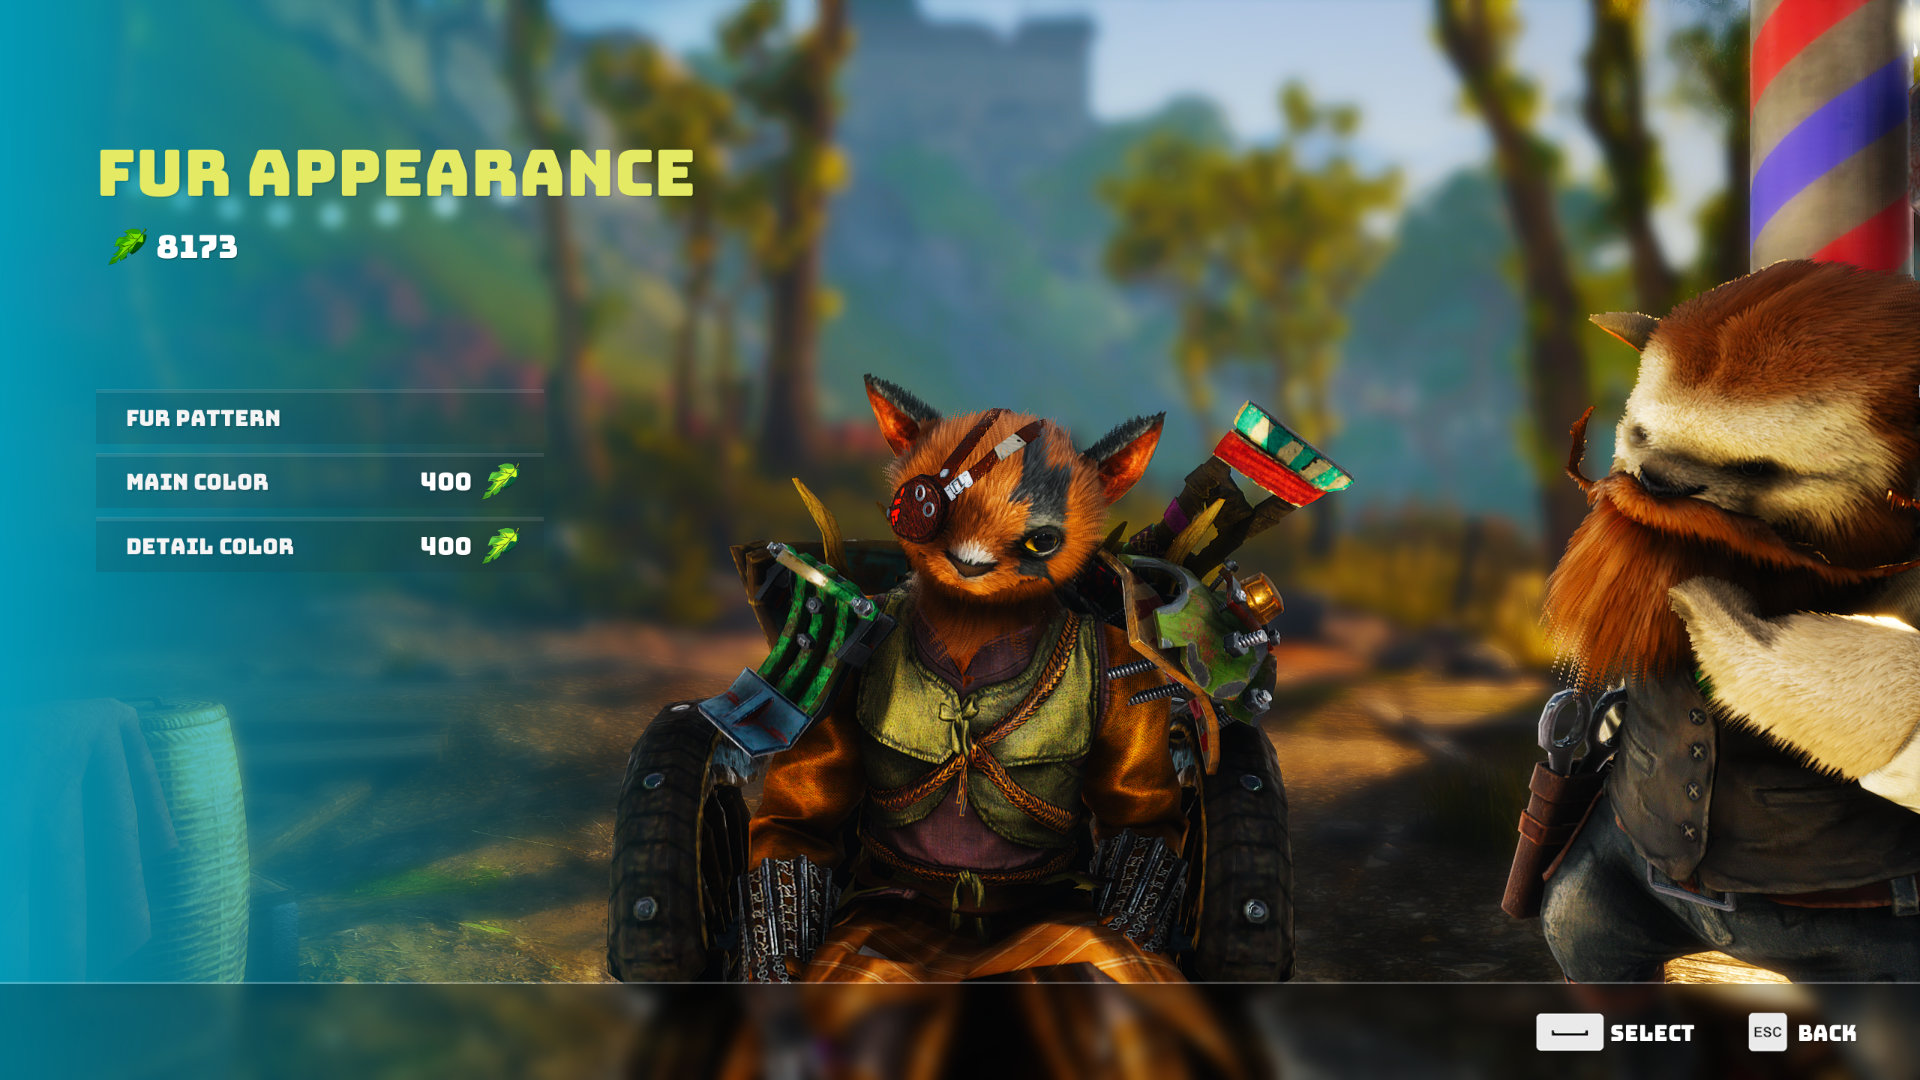 download biomutant coming to switch